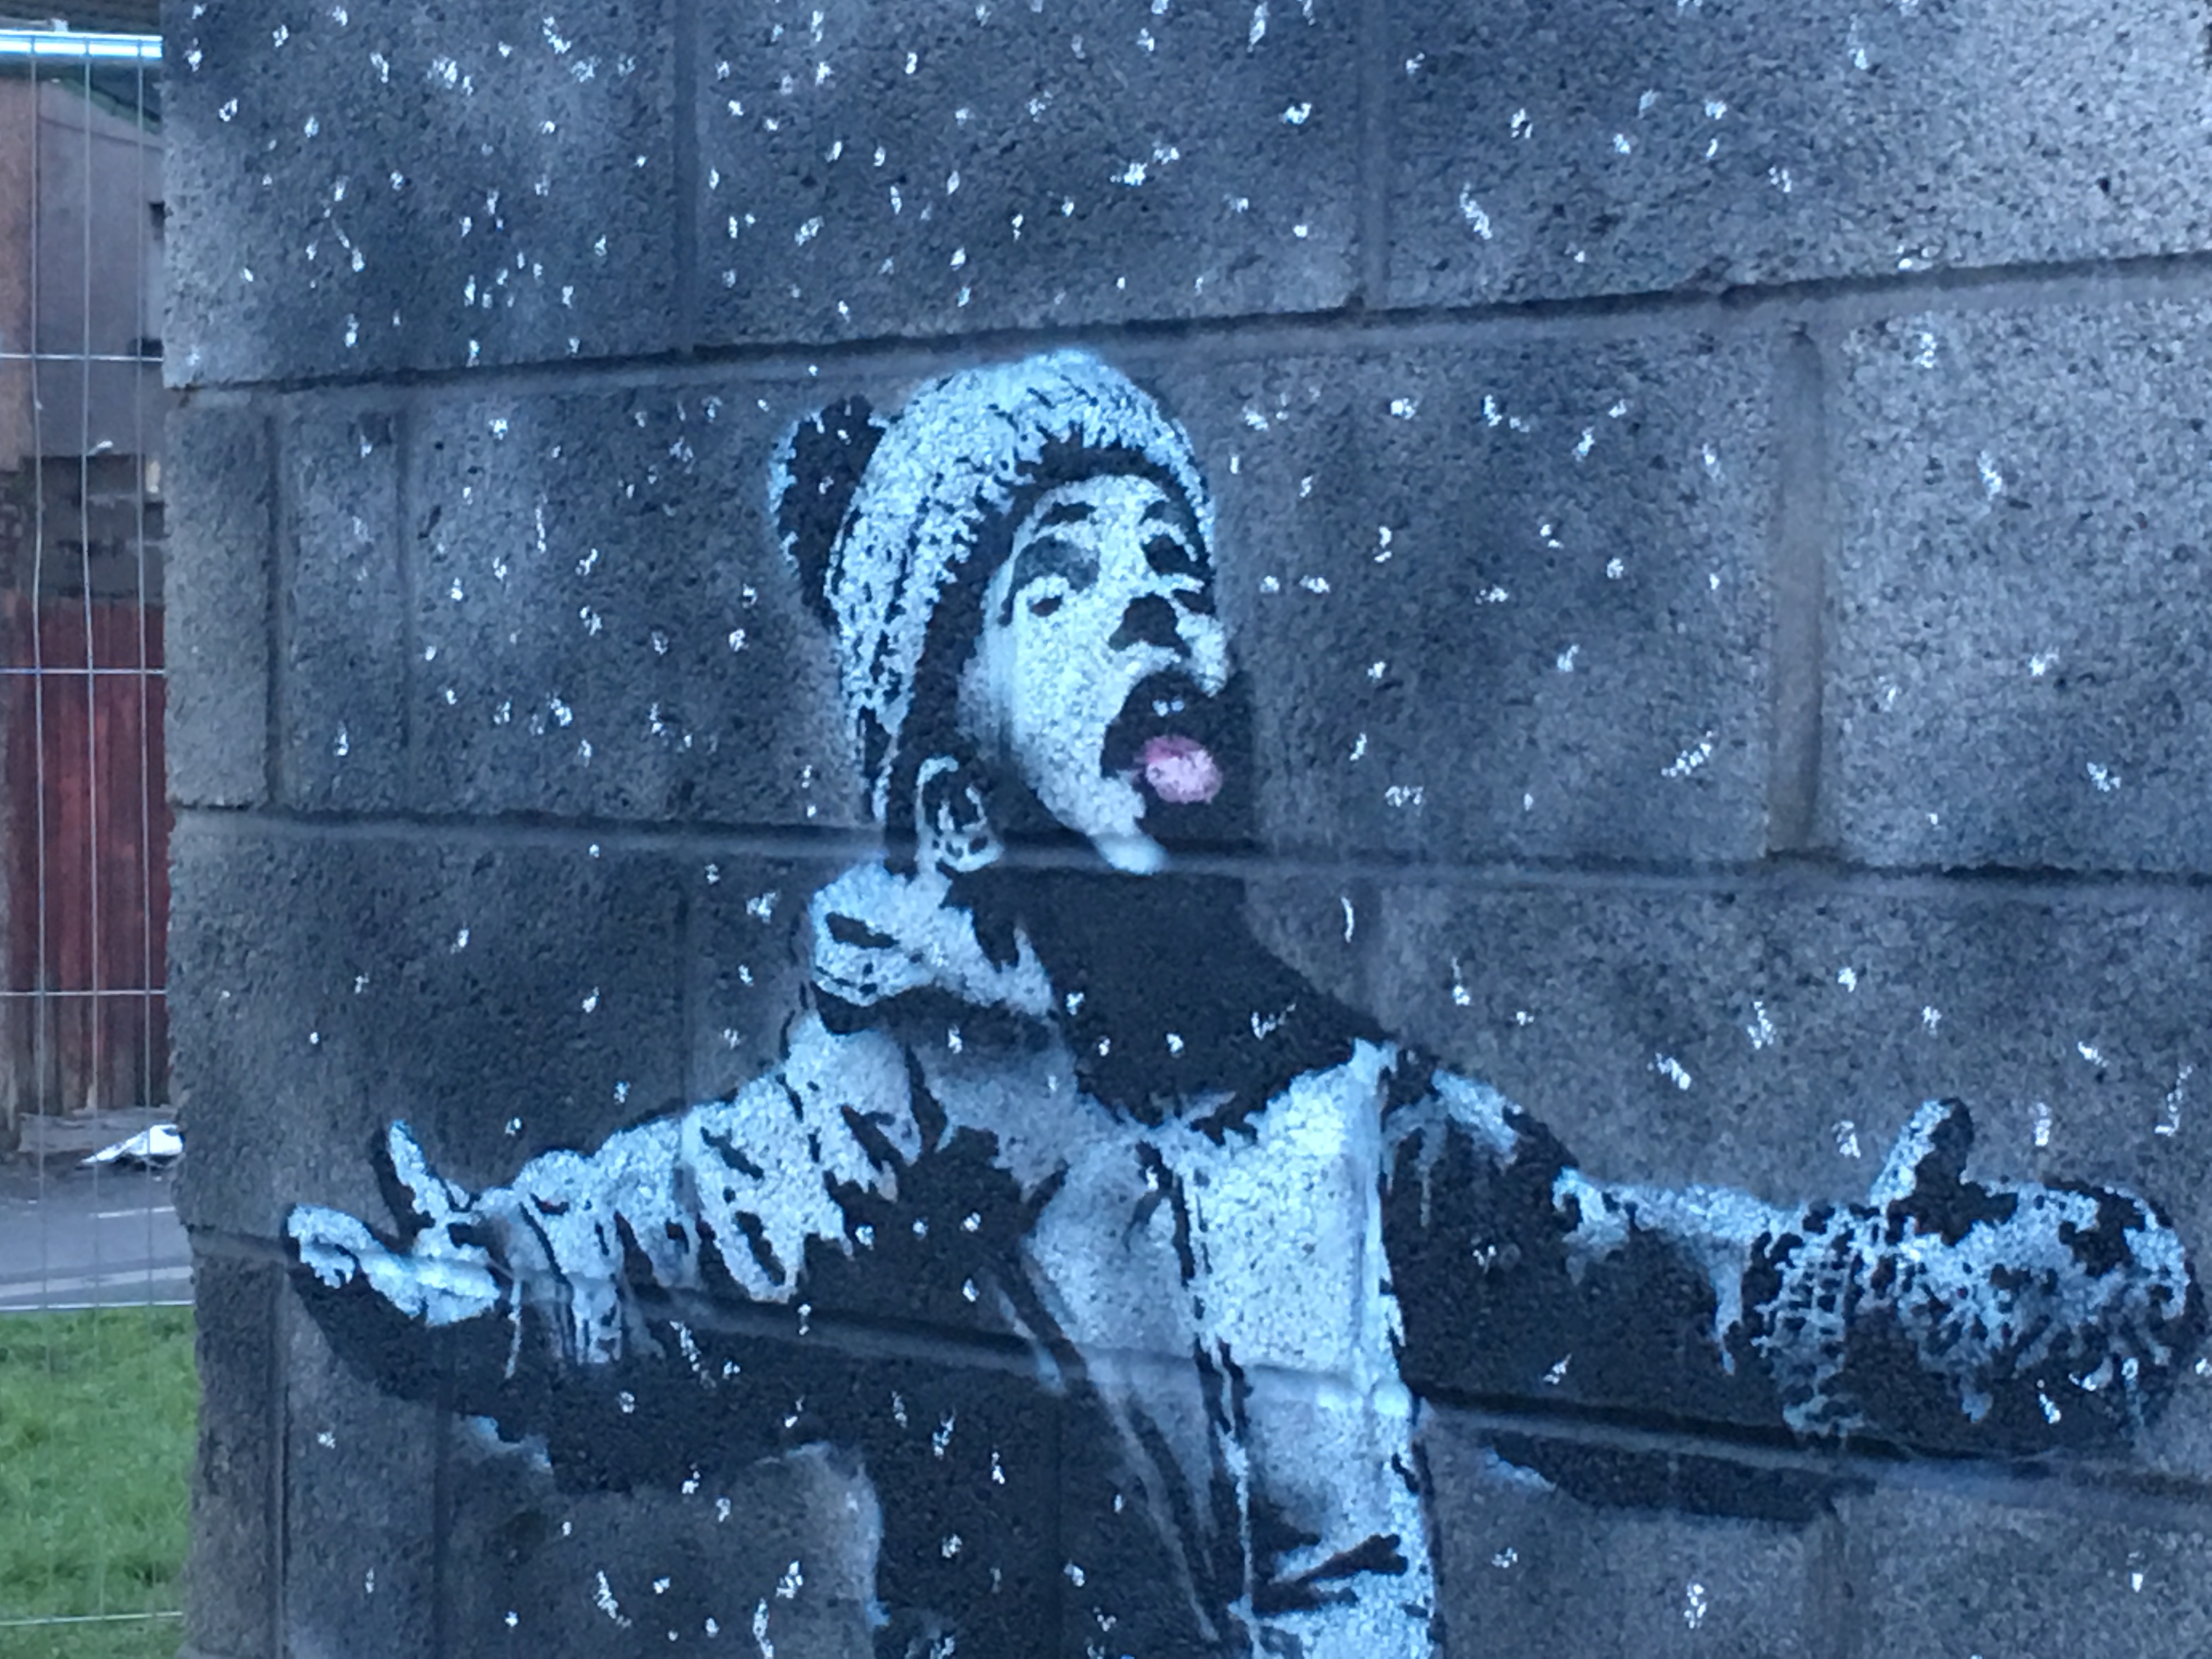 Banksy mural depicting child enjoying snow pollution fetched over $130,000